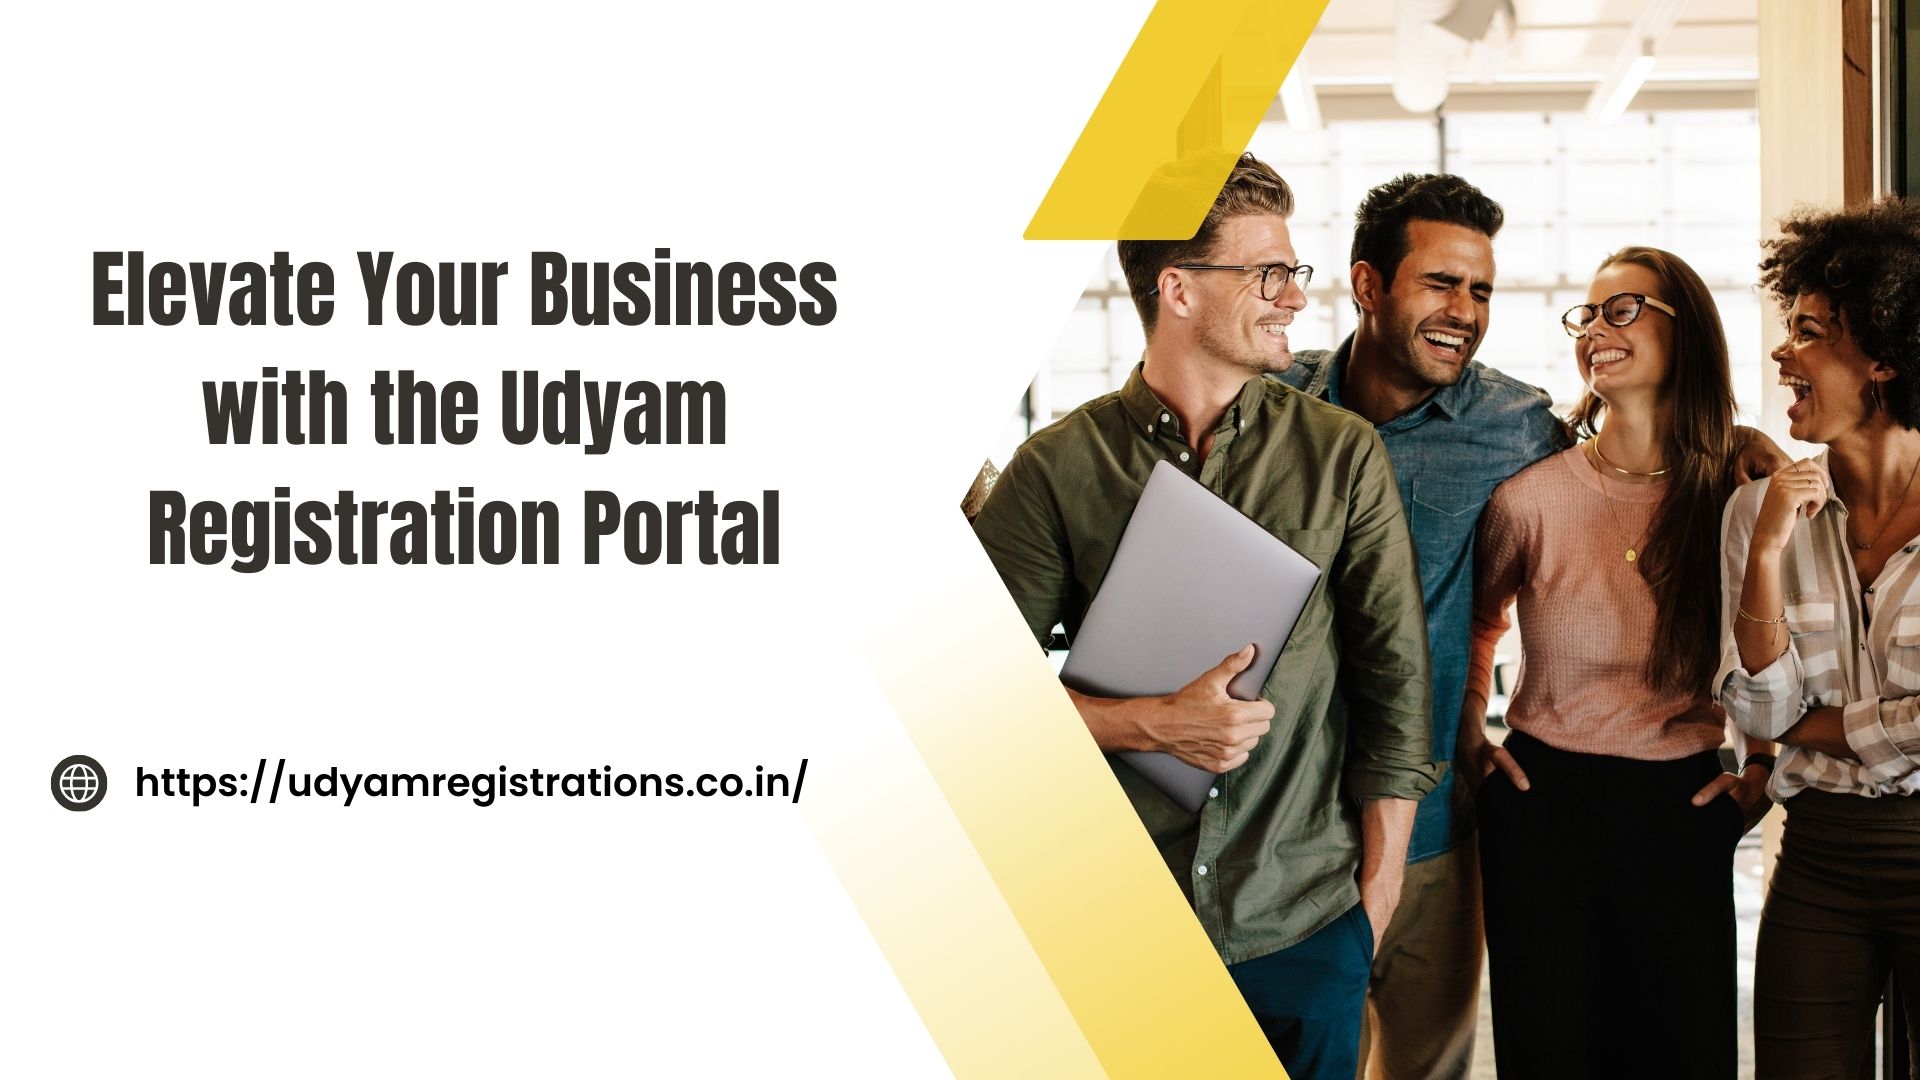 Elevate Your Business with the Udyam Registration Portal